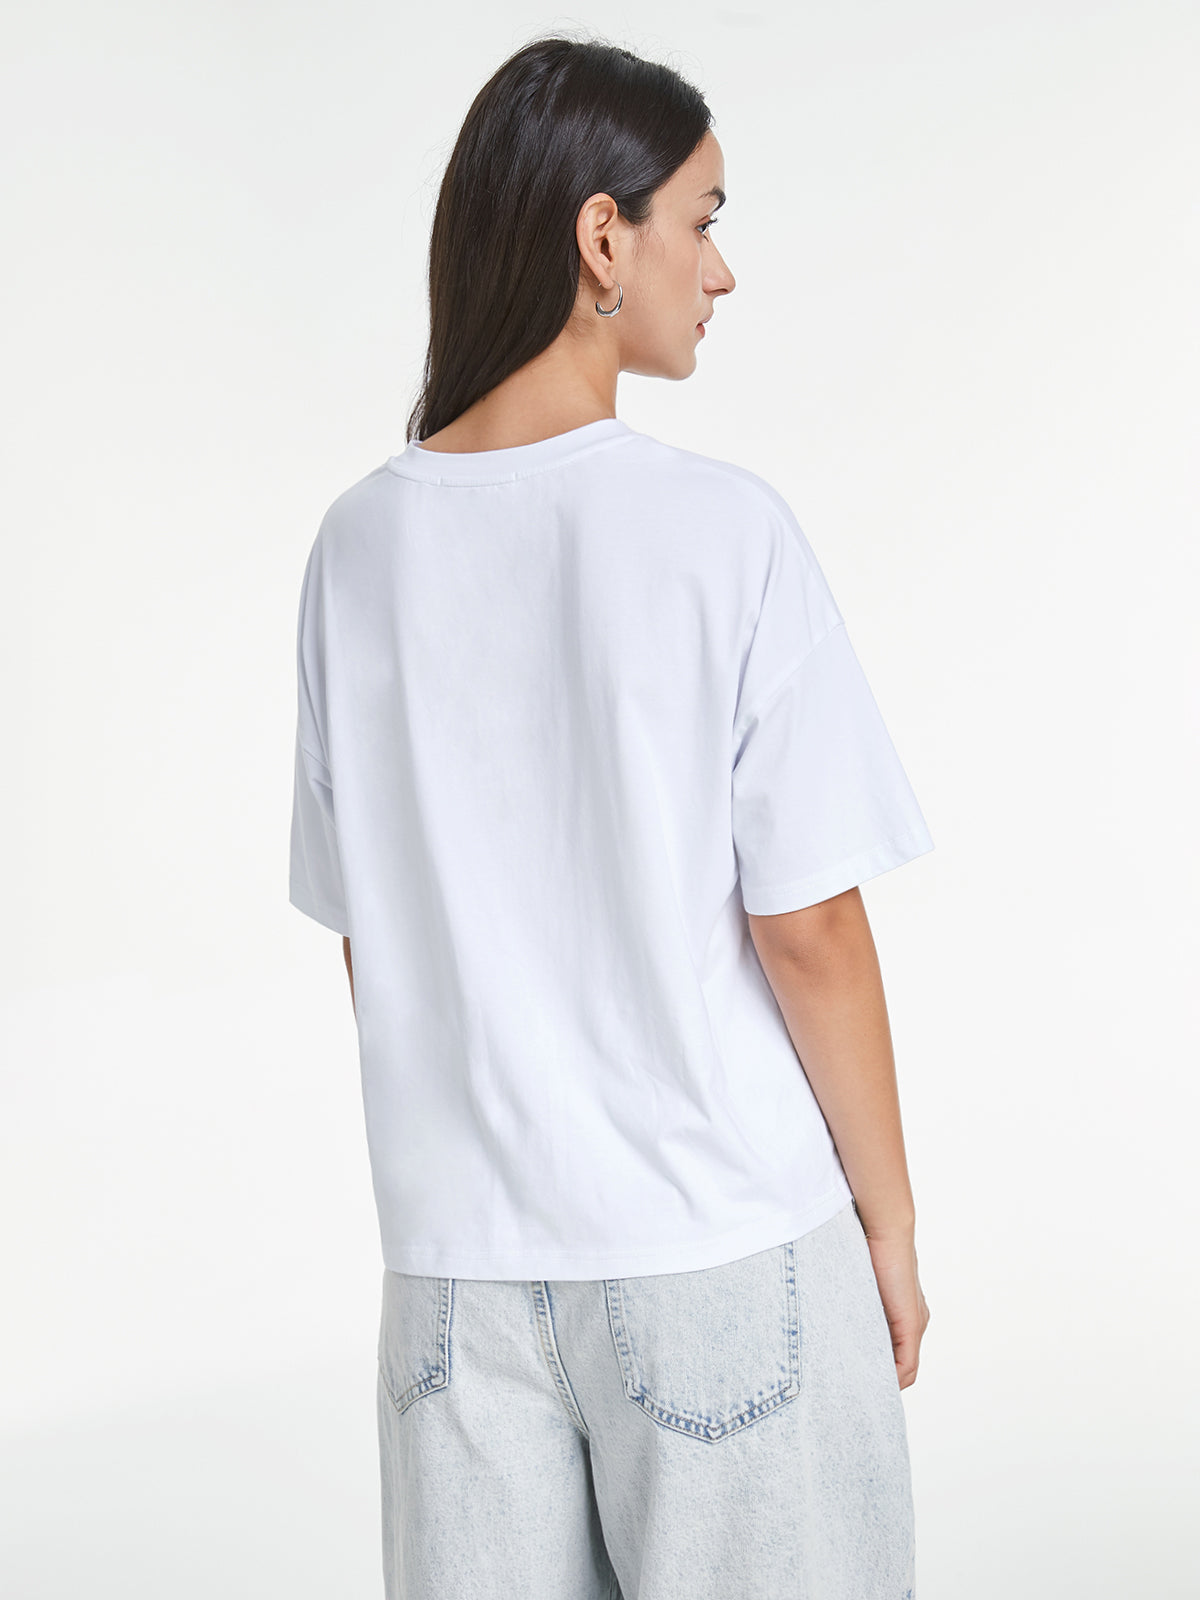 Relaxed Fit Solid Colored Essential T-Shirt